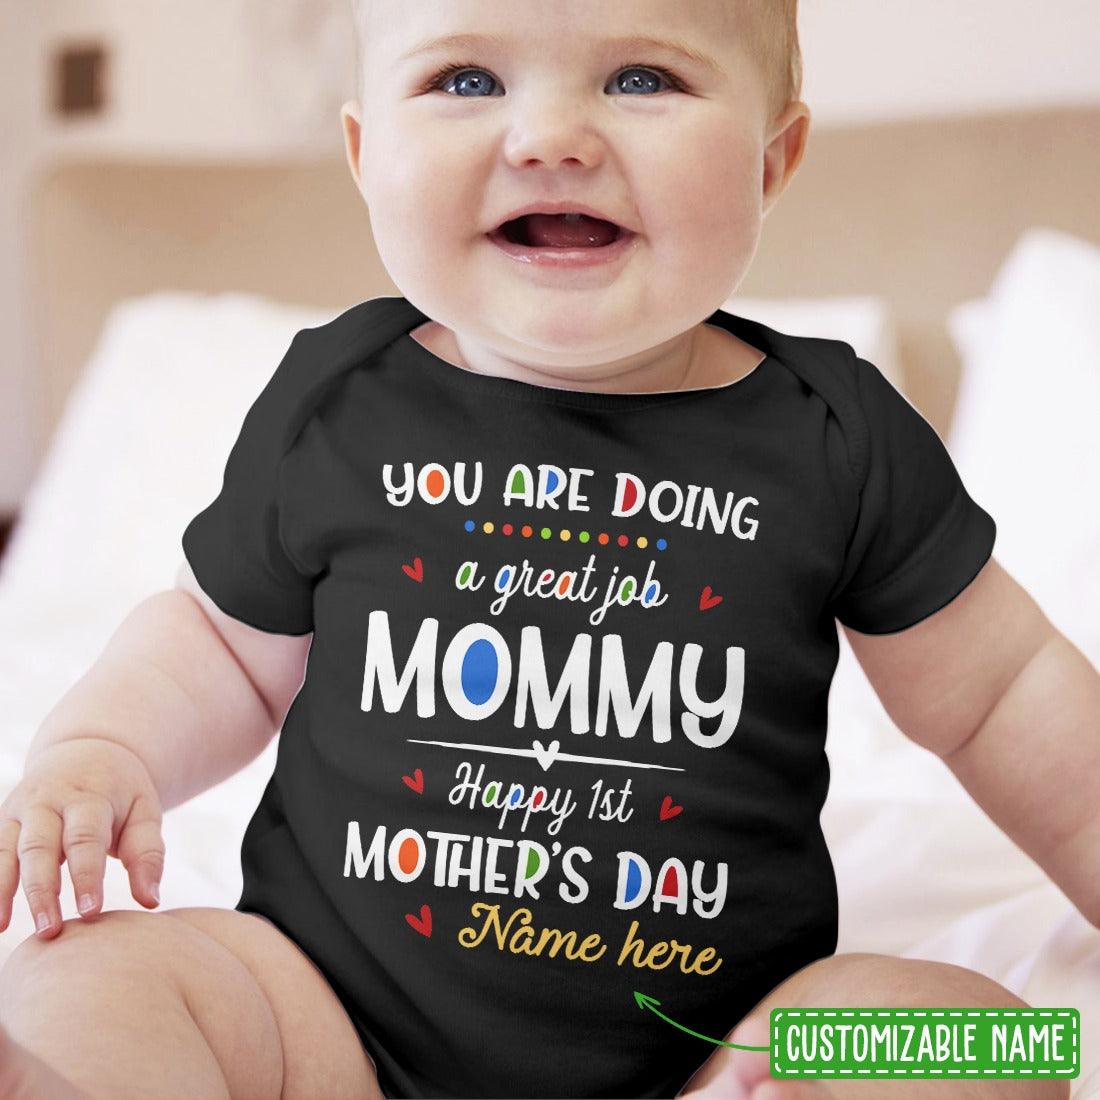 Happy 1st Mother's Day Baby Bodysuit Onesies - You Are Doing A Great Job Mommy Personalized Baby Newborn Onesies - First Mother's Day Baby Onesies - Amzanimalsgift